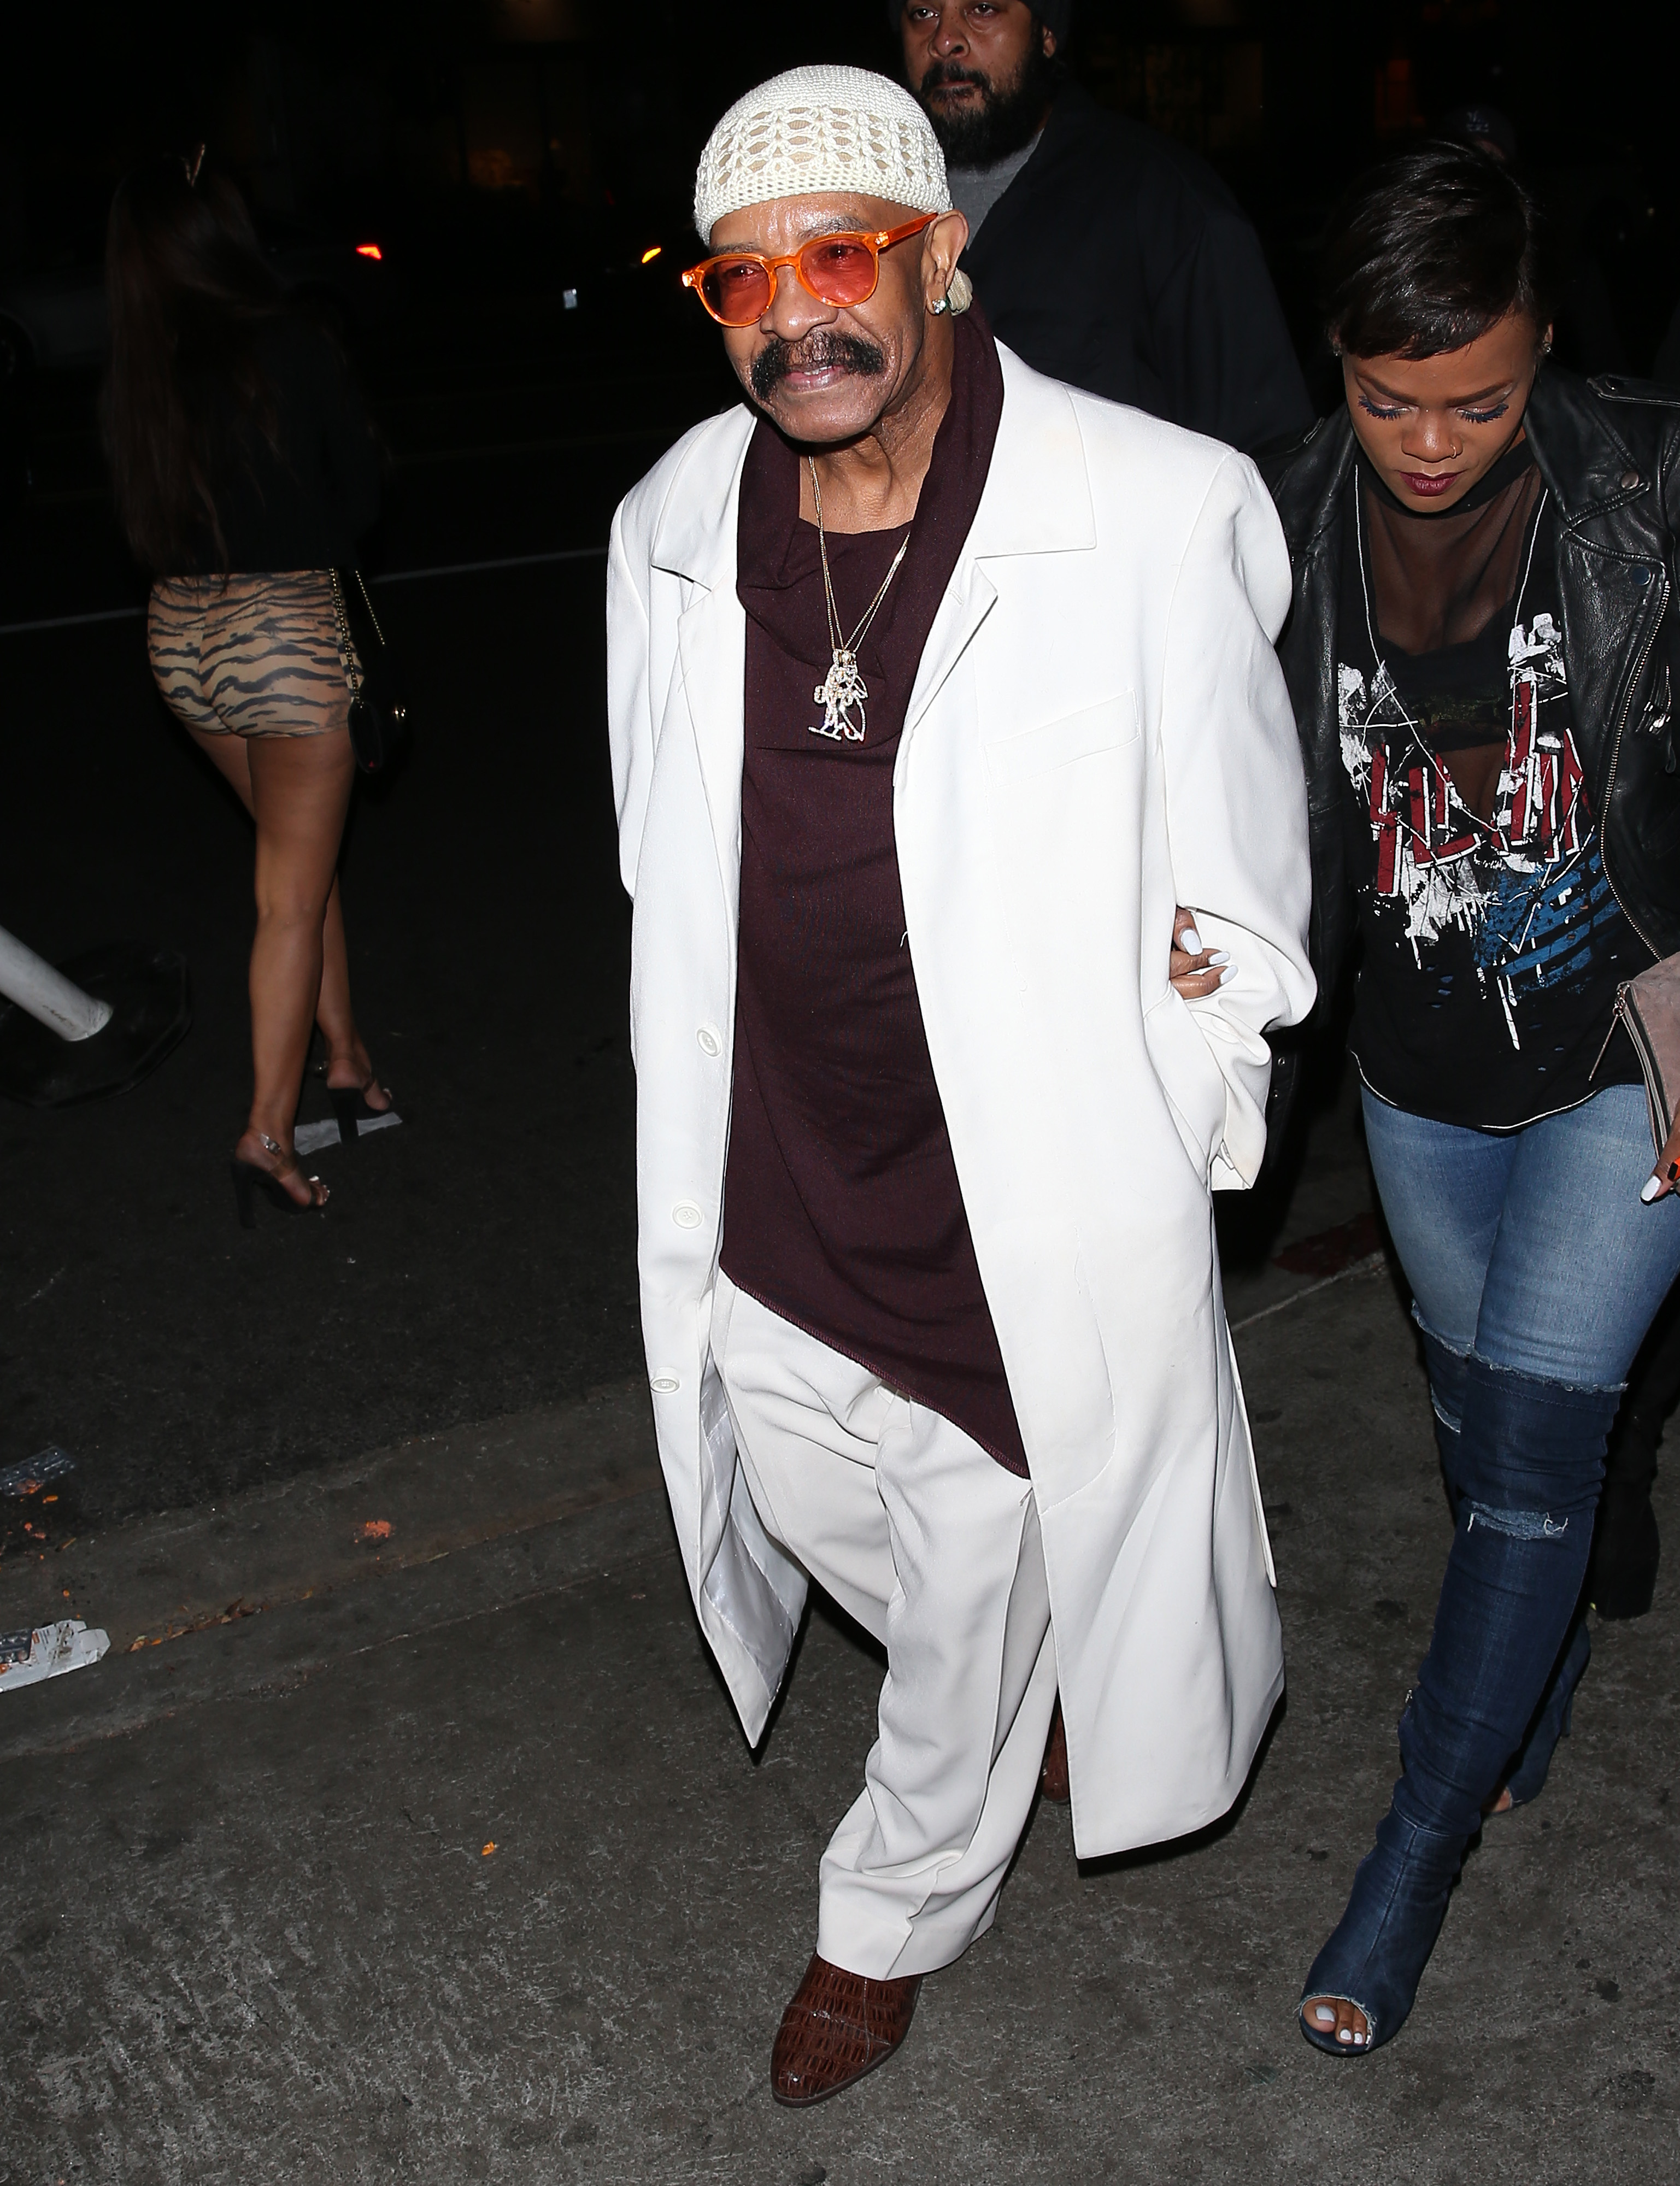 Drake Dresses as His Dad at Halloween Party Amid Feud — See Photos